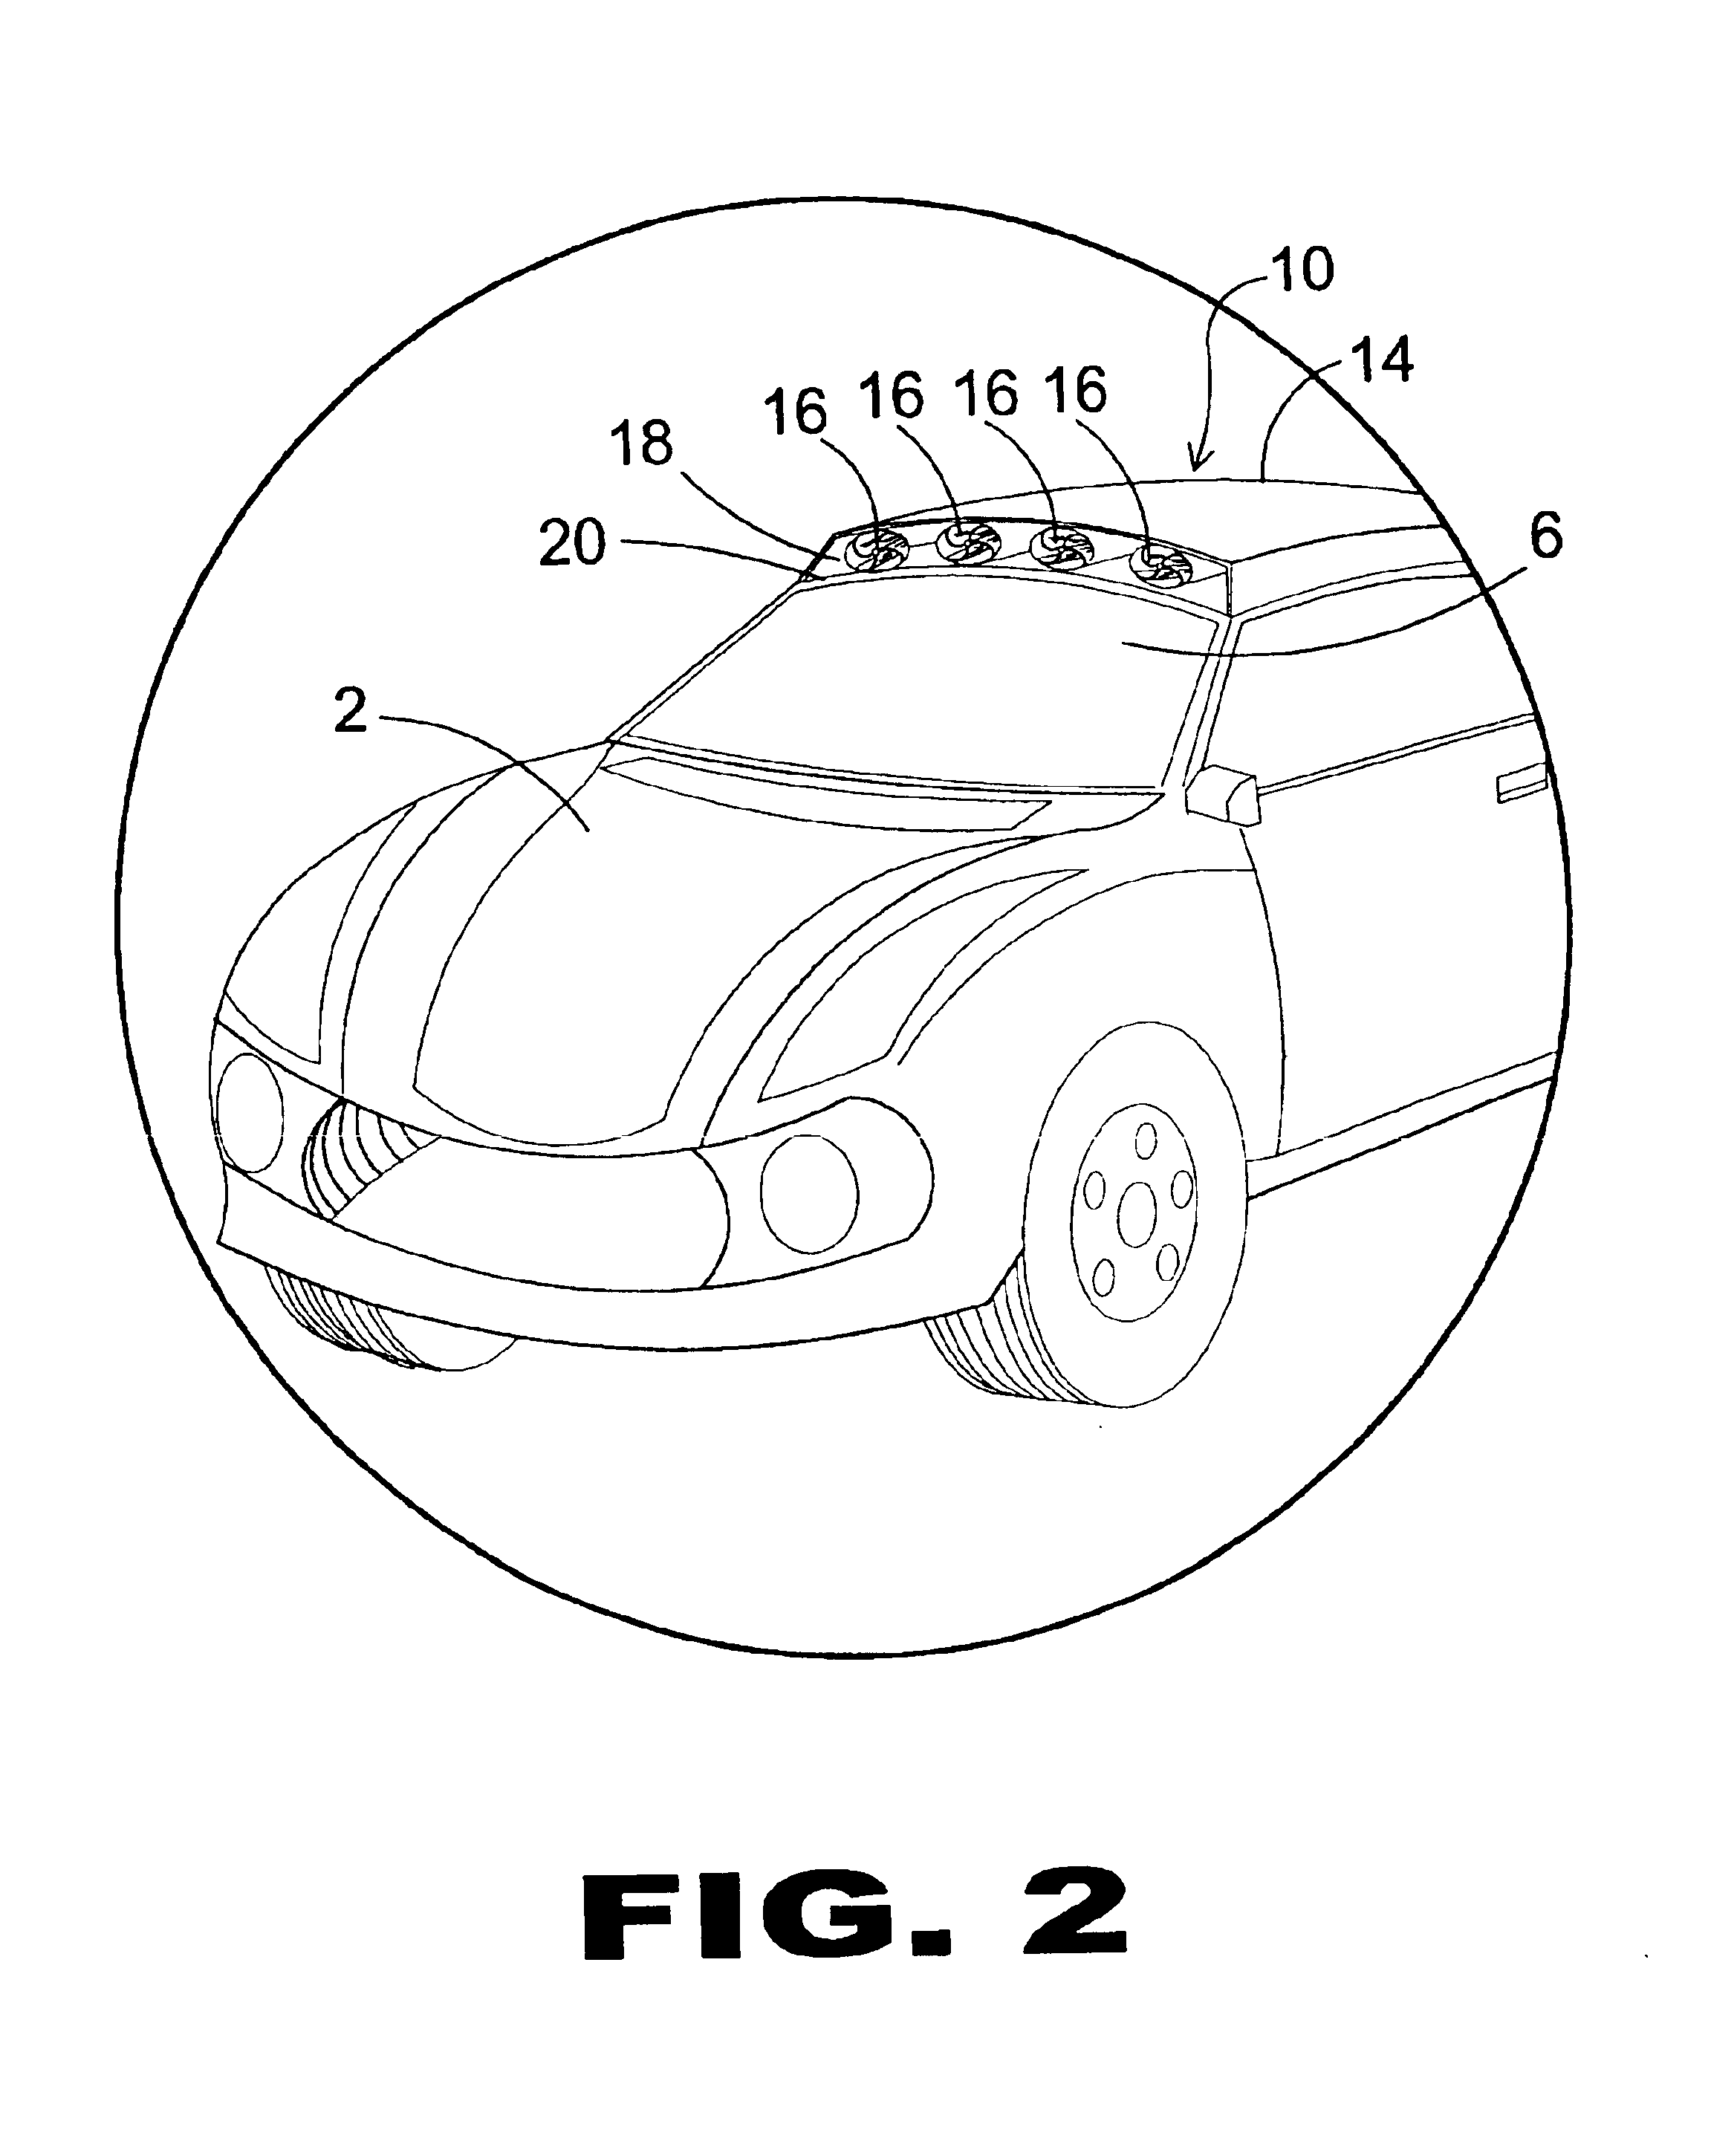 Portable wind power apparatus for electric vehicles